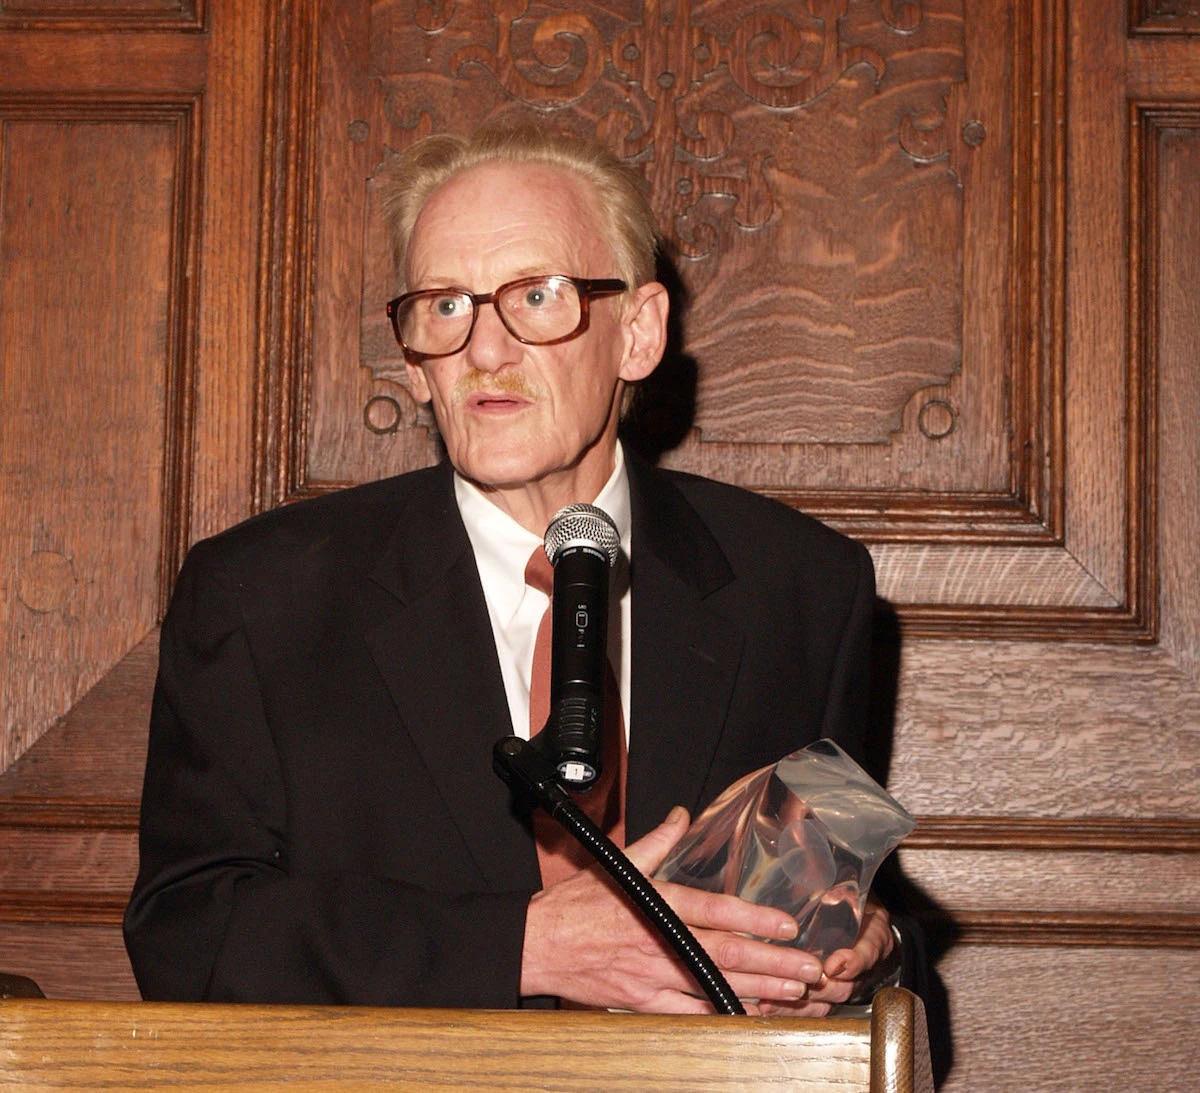 Peter Schjeldahl, Art Critic Who Wrote with Unparalleled Elegance, Dies at80